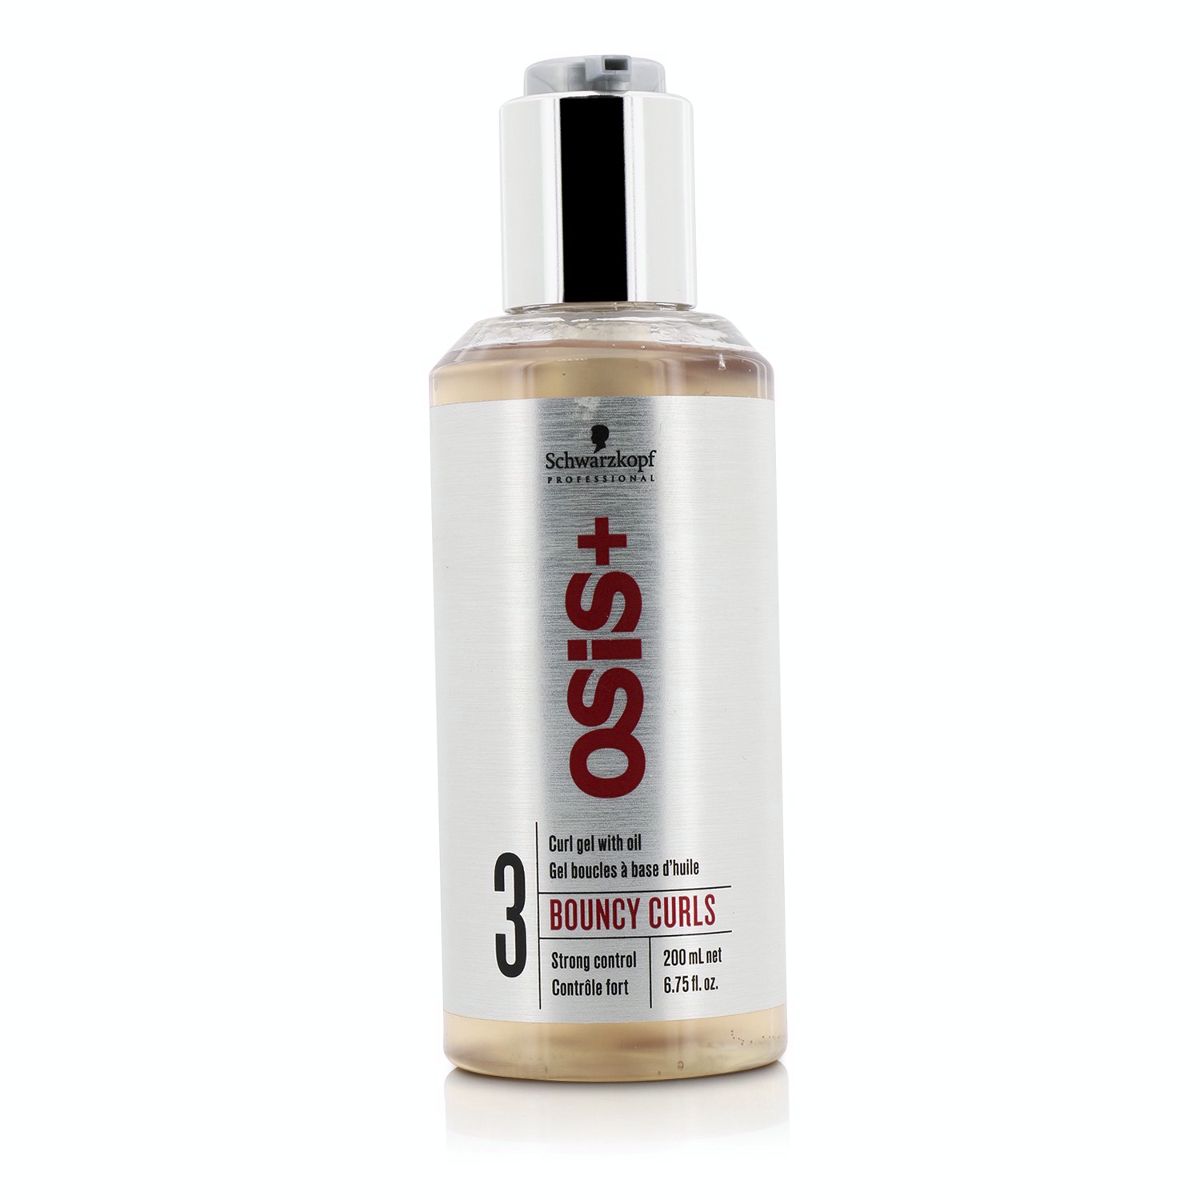 Osis+ Bouncy Curls Curl Gel with Oil (Strong Control) Schwarzkopf Image